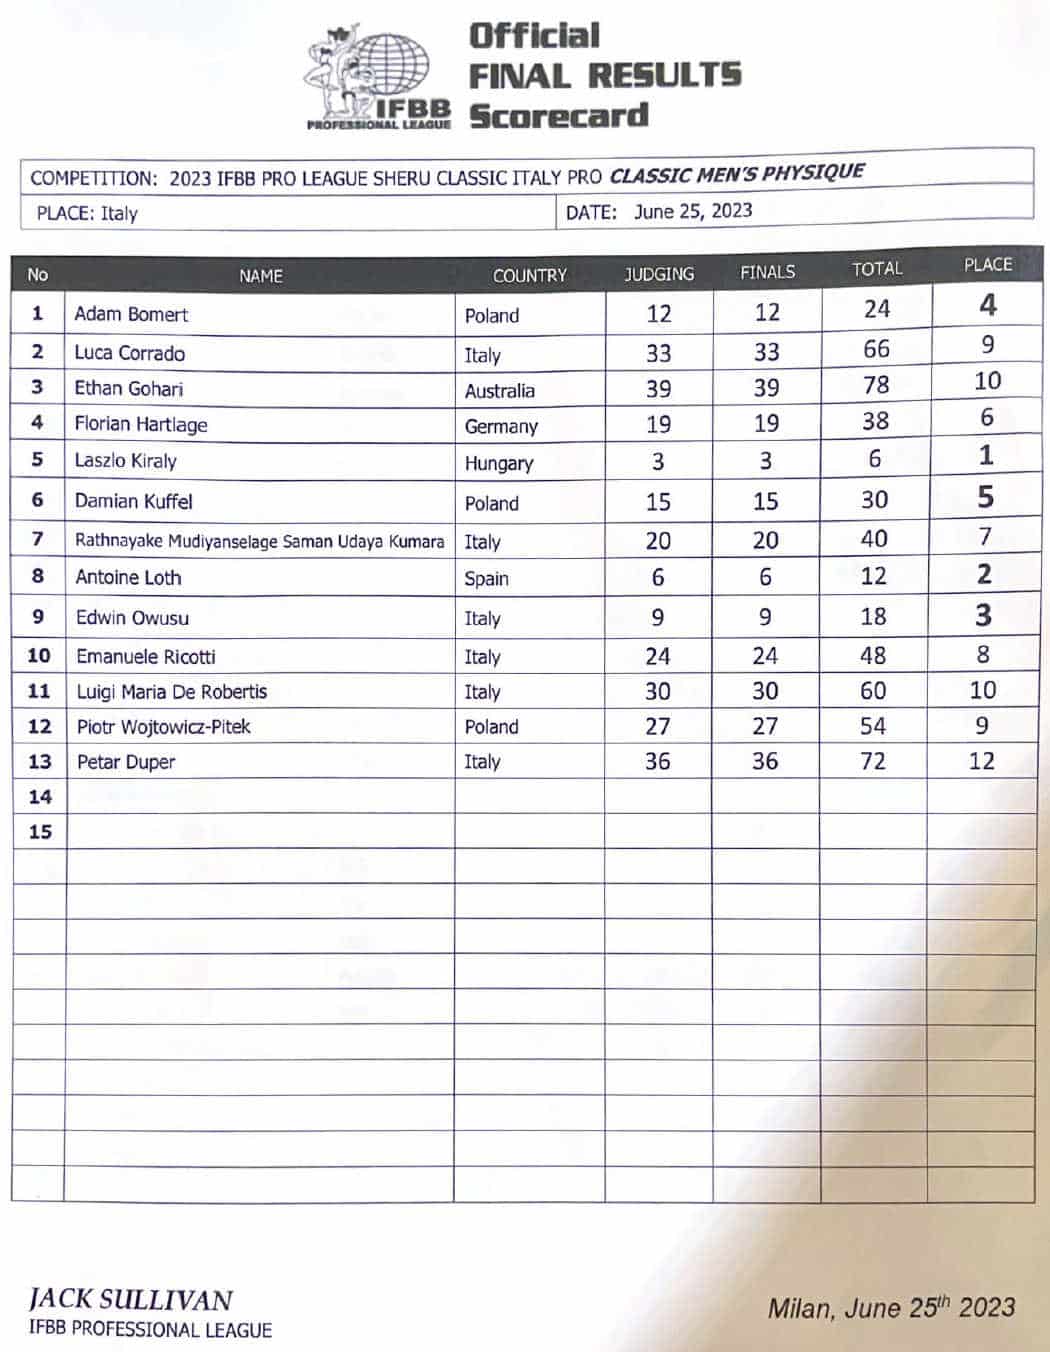 2023 Sheru Classic Italy Pro Show Results and Scorecards